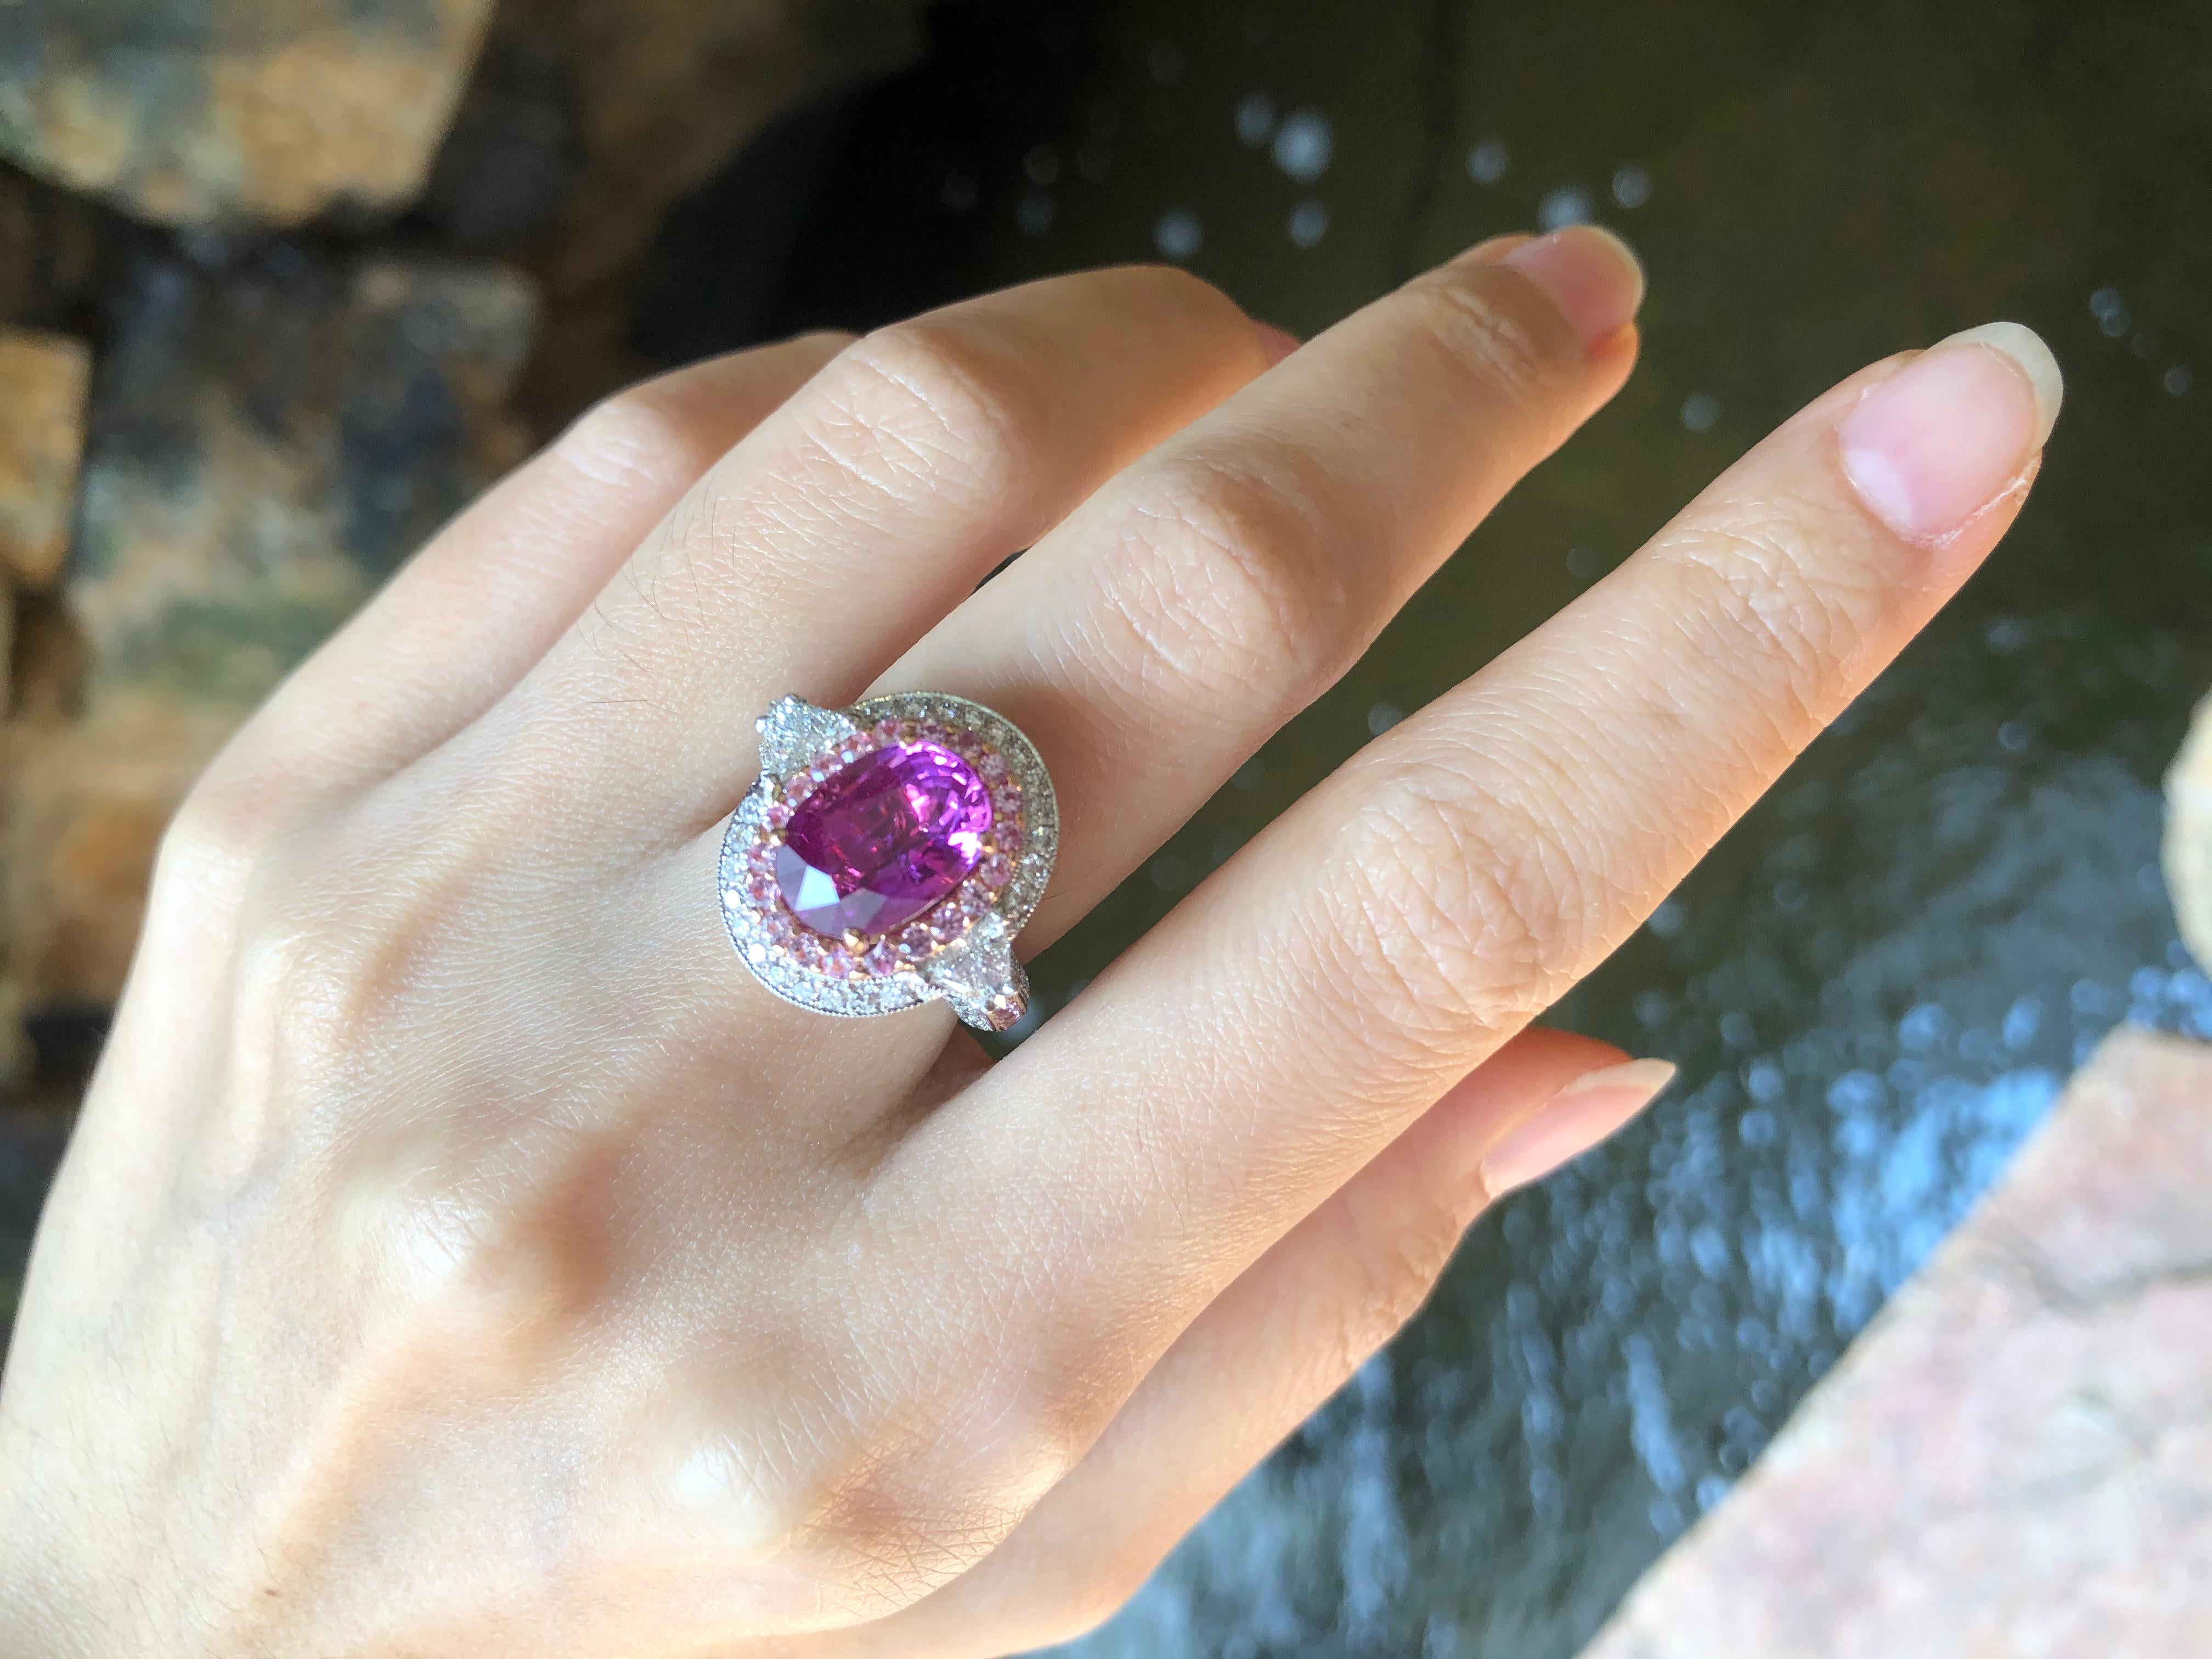 Unheated Pink Sapphire 4.02 carats with Pink Sapphire 0.63 carat and Diamond 1.15 carats Ring set in 18 Karat White Gold Settings
(GIA Certified) 

Width:  1.9 cm 
Length: 1.7 cm
Ring Size: 51
Total Weight: 11.09 grams

